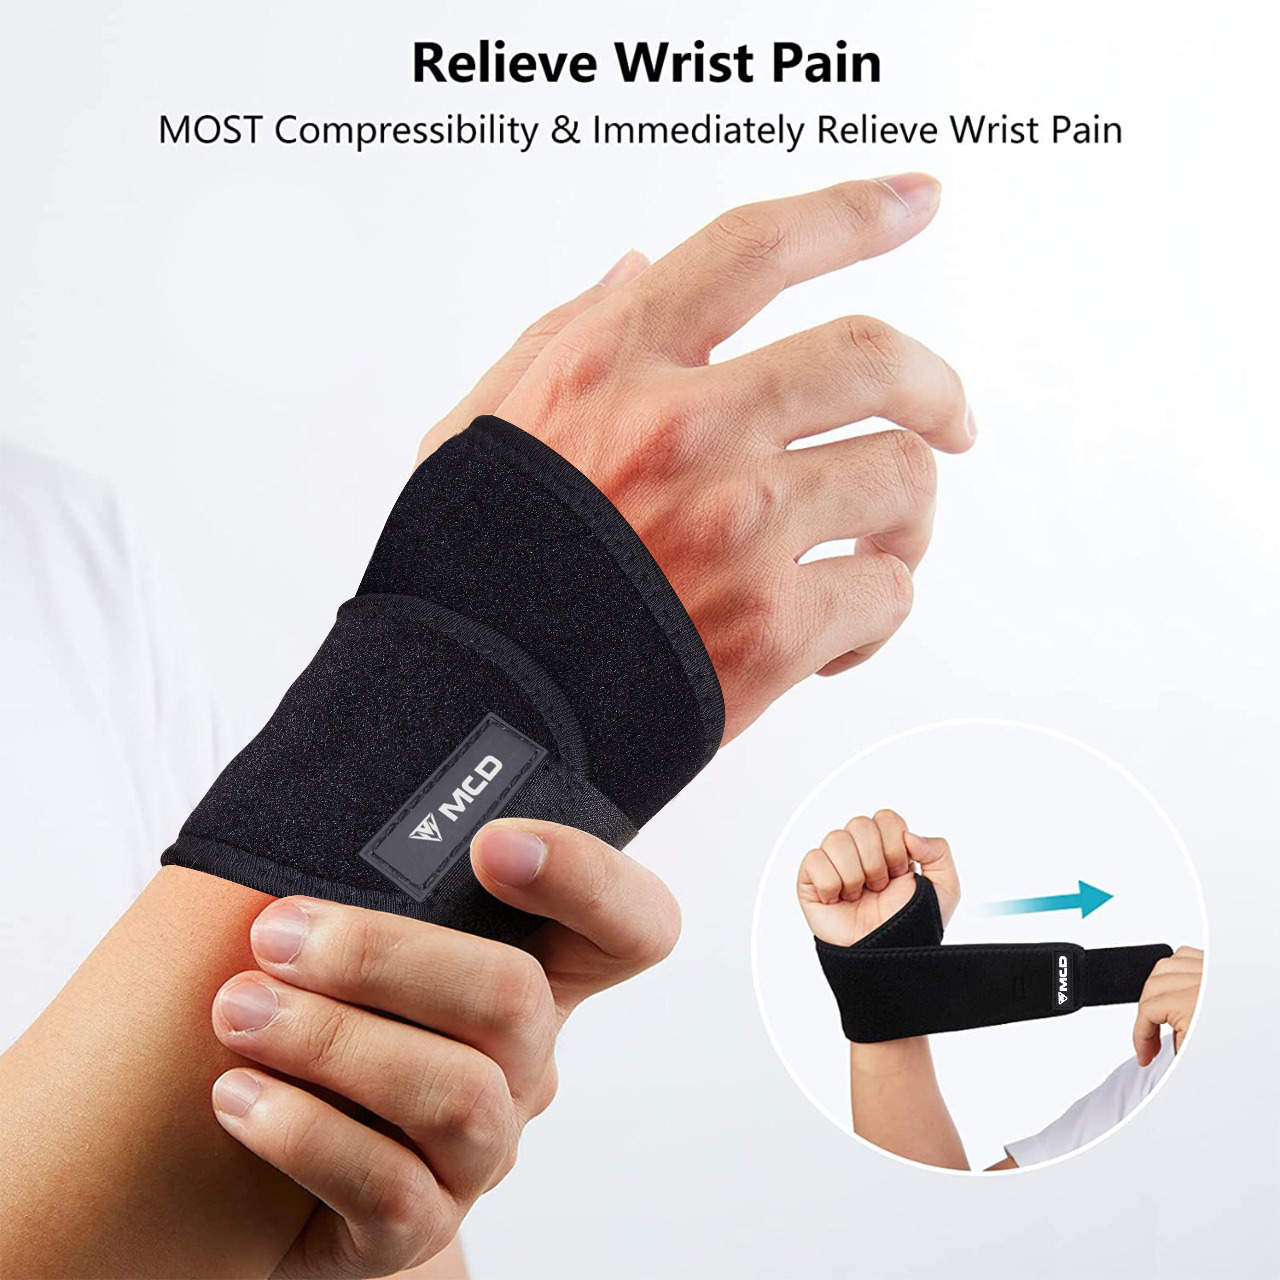 Mcd Wrist Braces With Thumb Support Best For Home And Gym